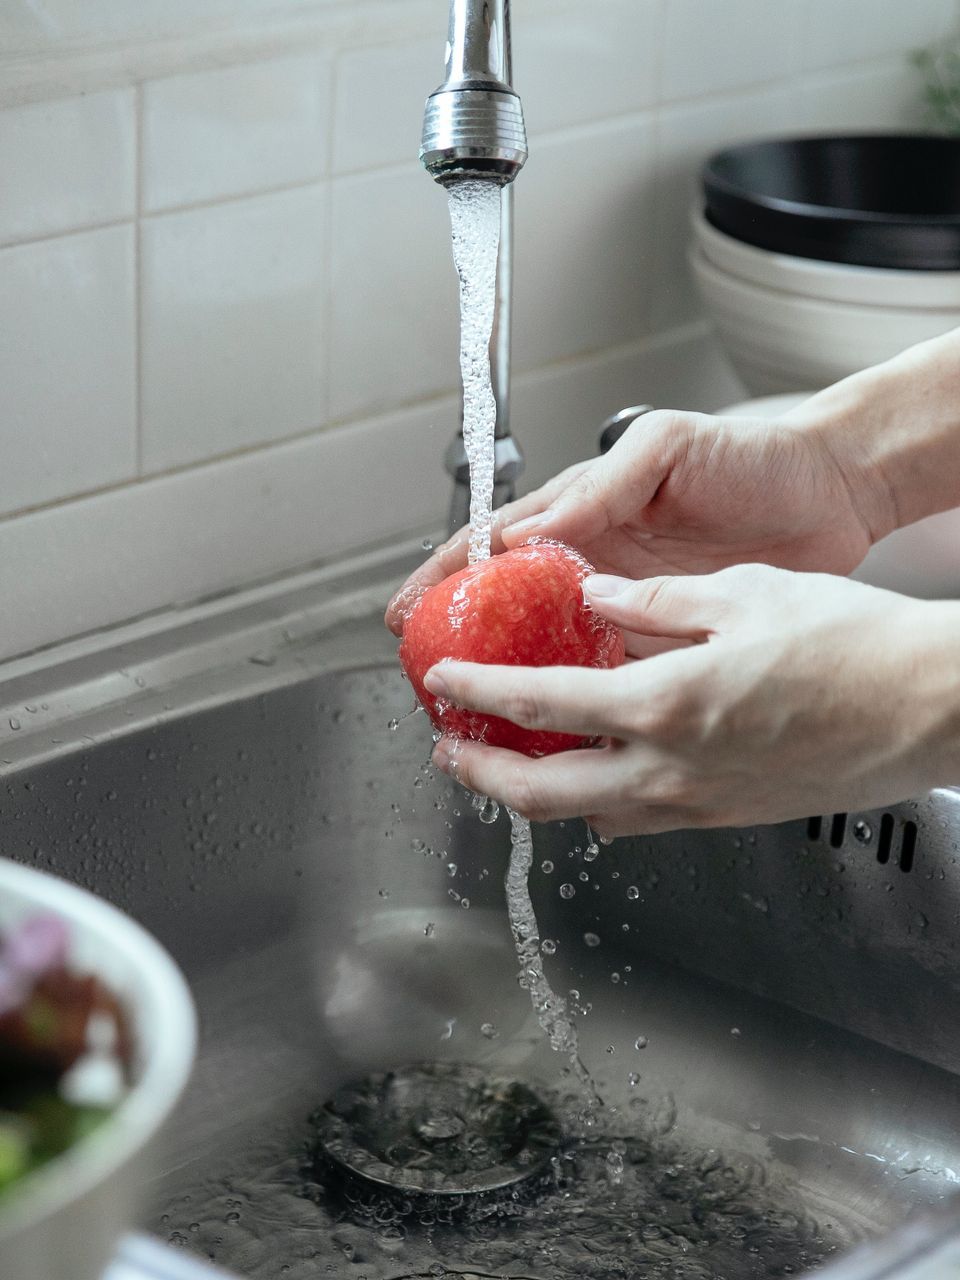 a person is washing an apple in a kitchen sink